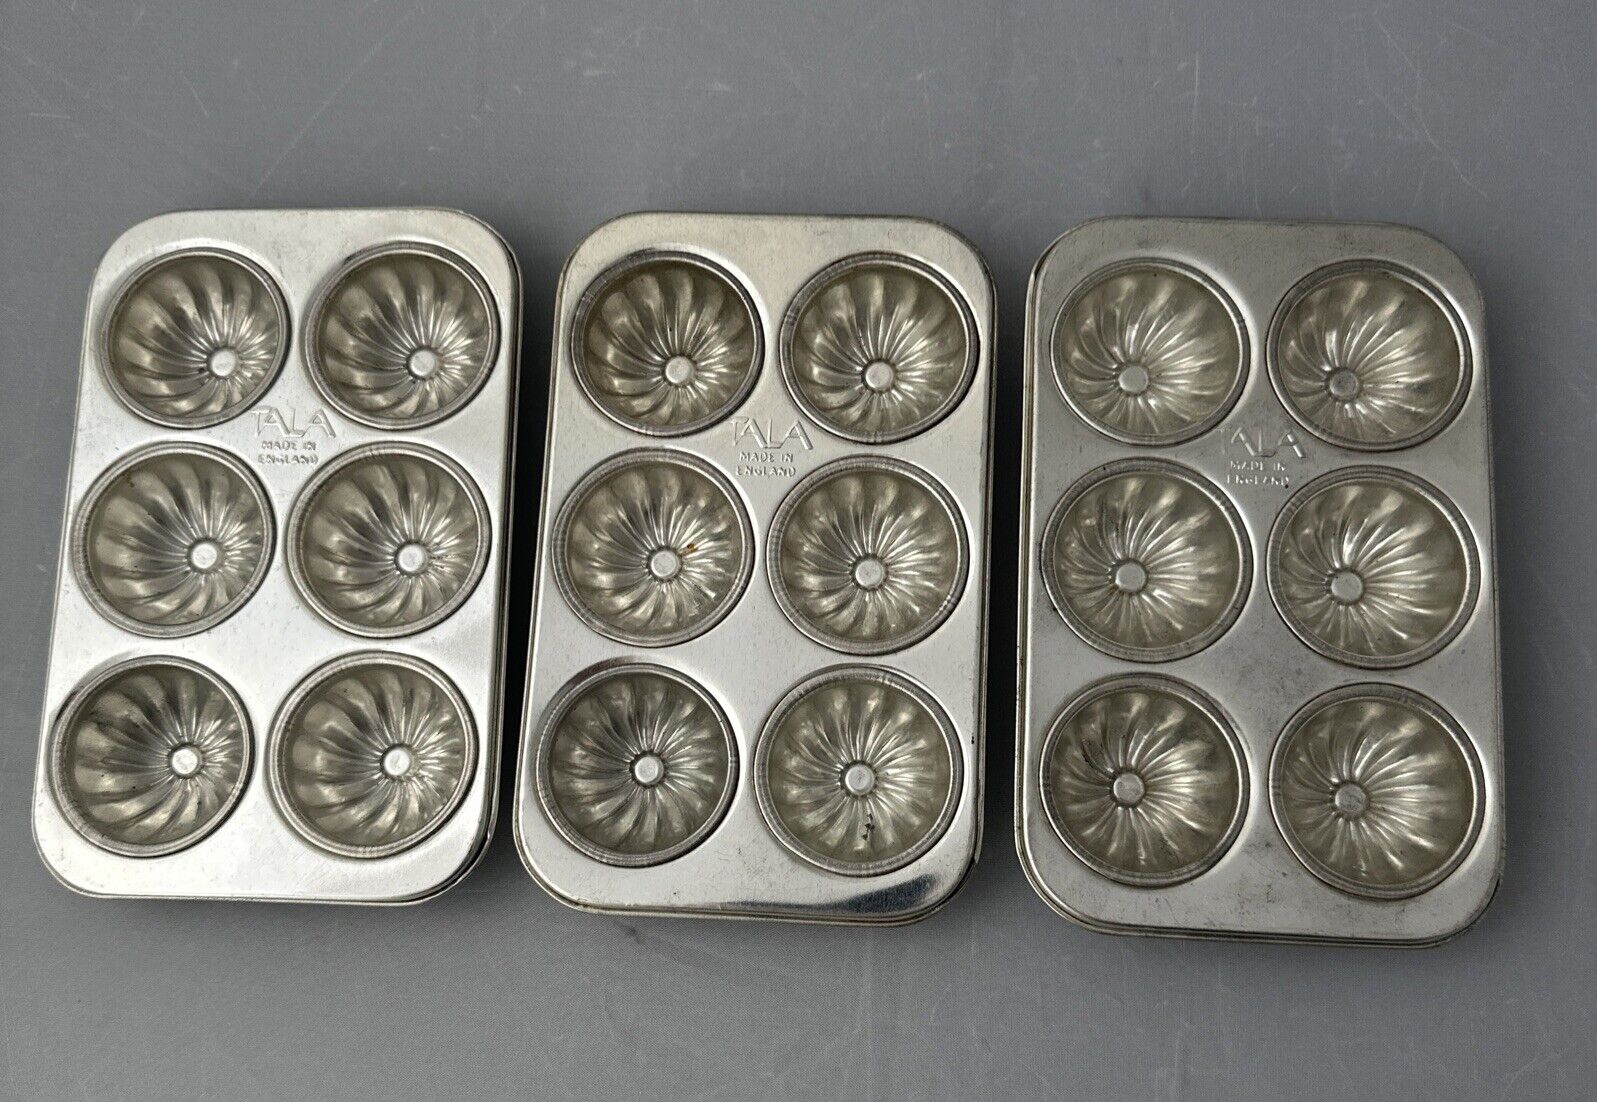 Vintage Tala 6 Mini Tart Muffin Baking Pan Molds Lot of 3 Made in England